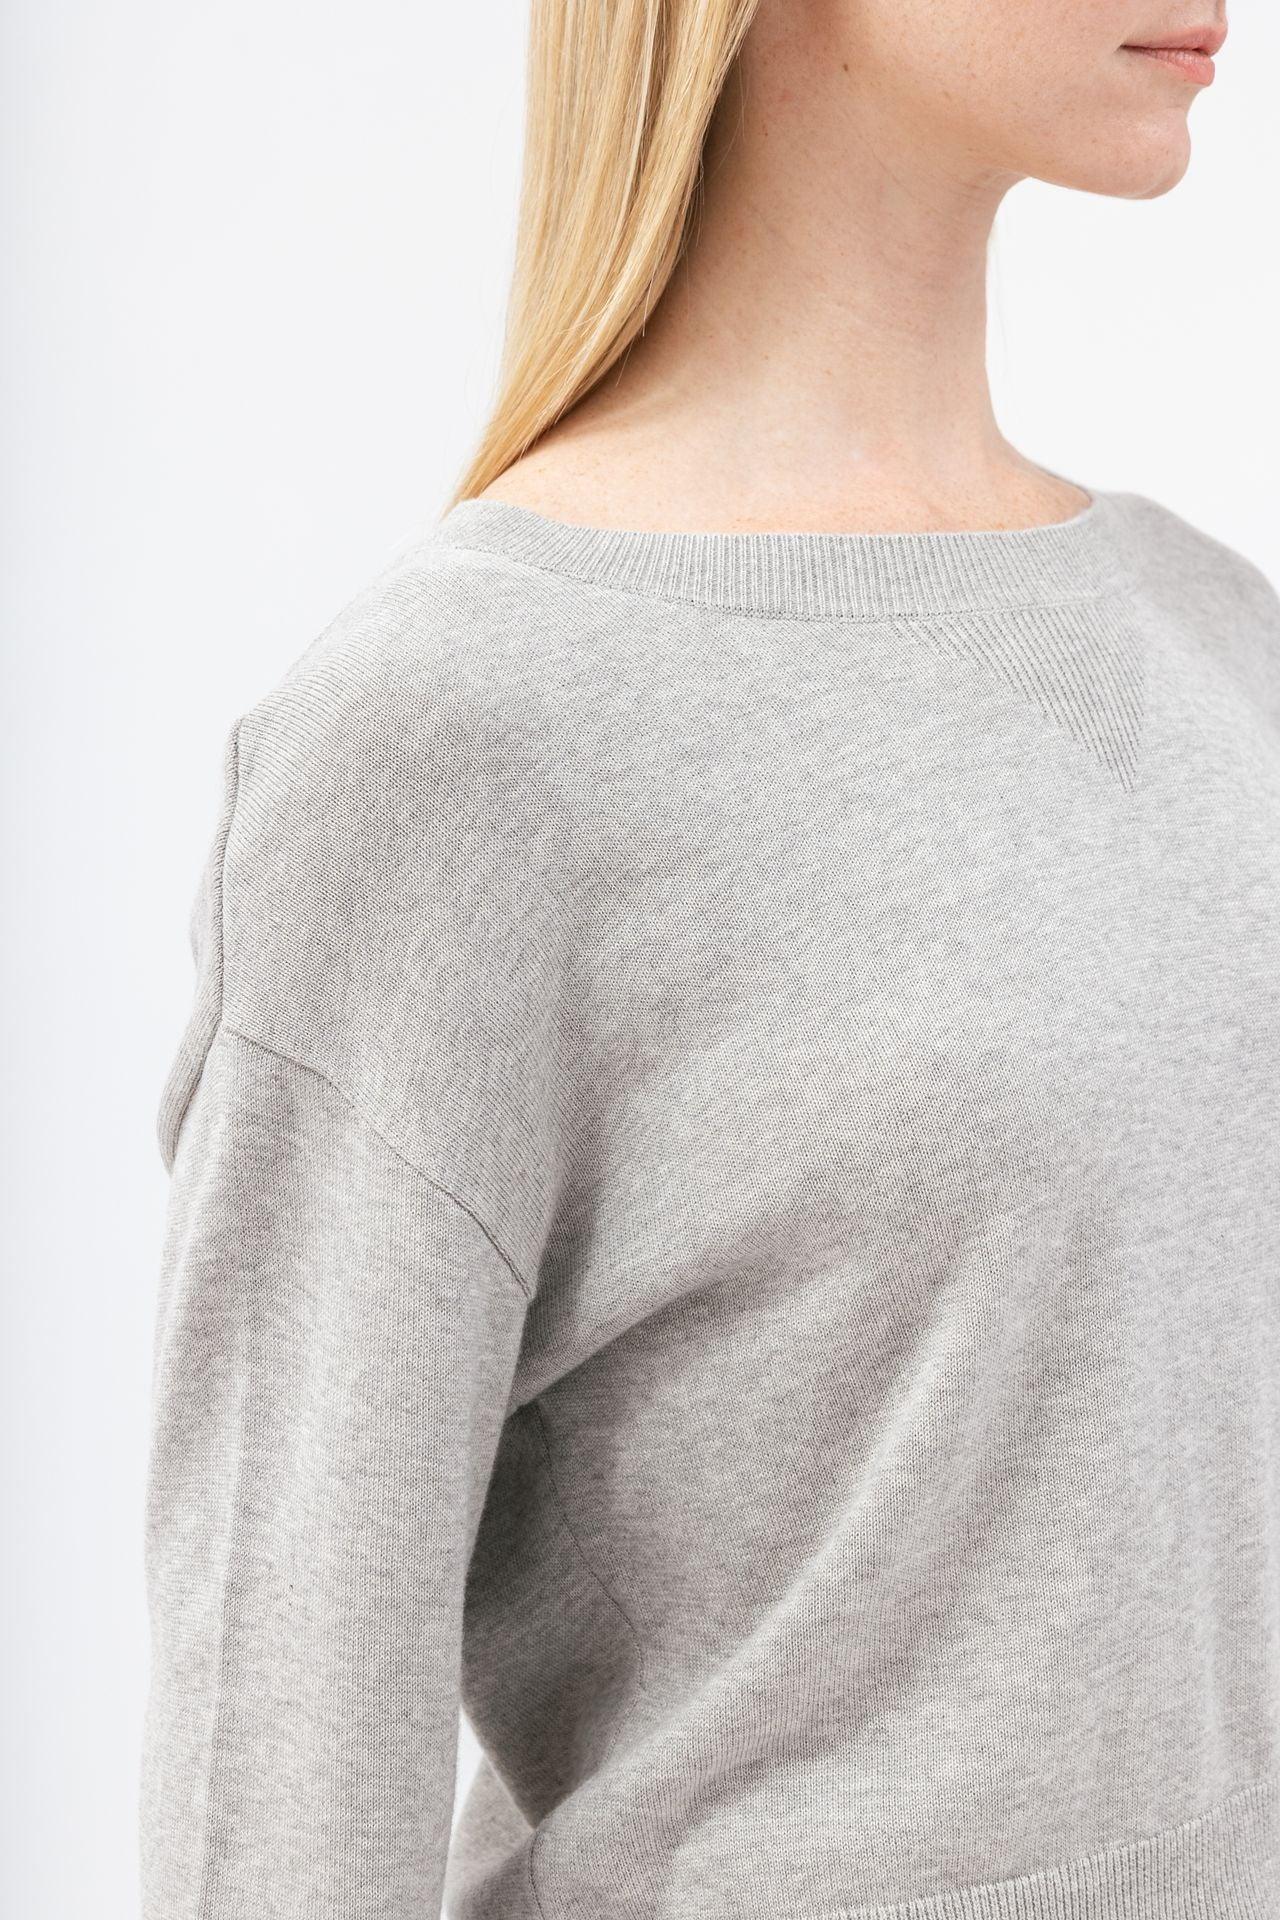 Women's Cropped Sweater - NOT LABELED